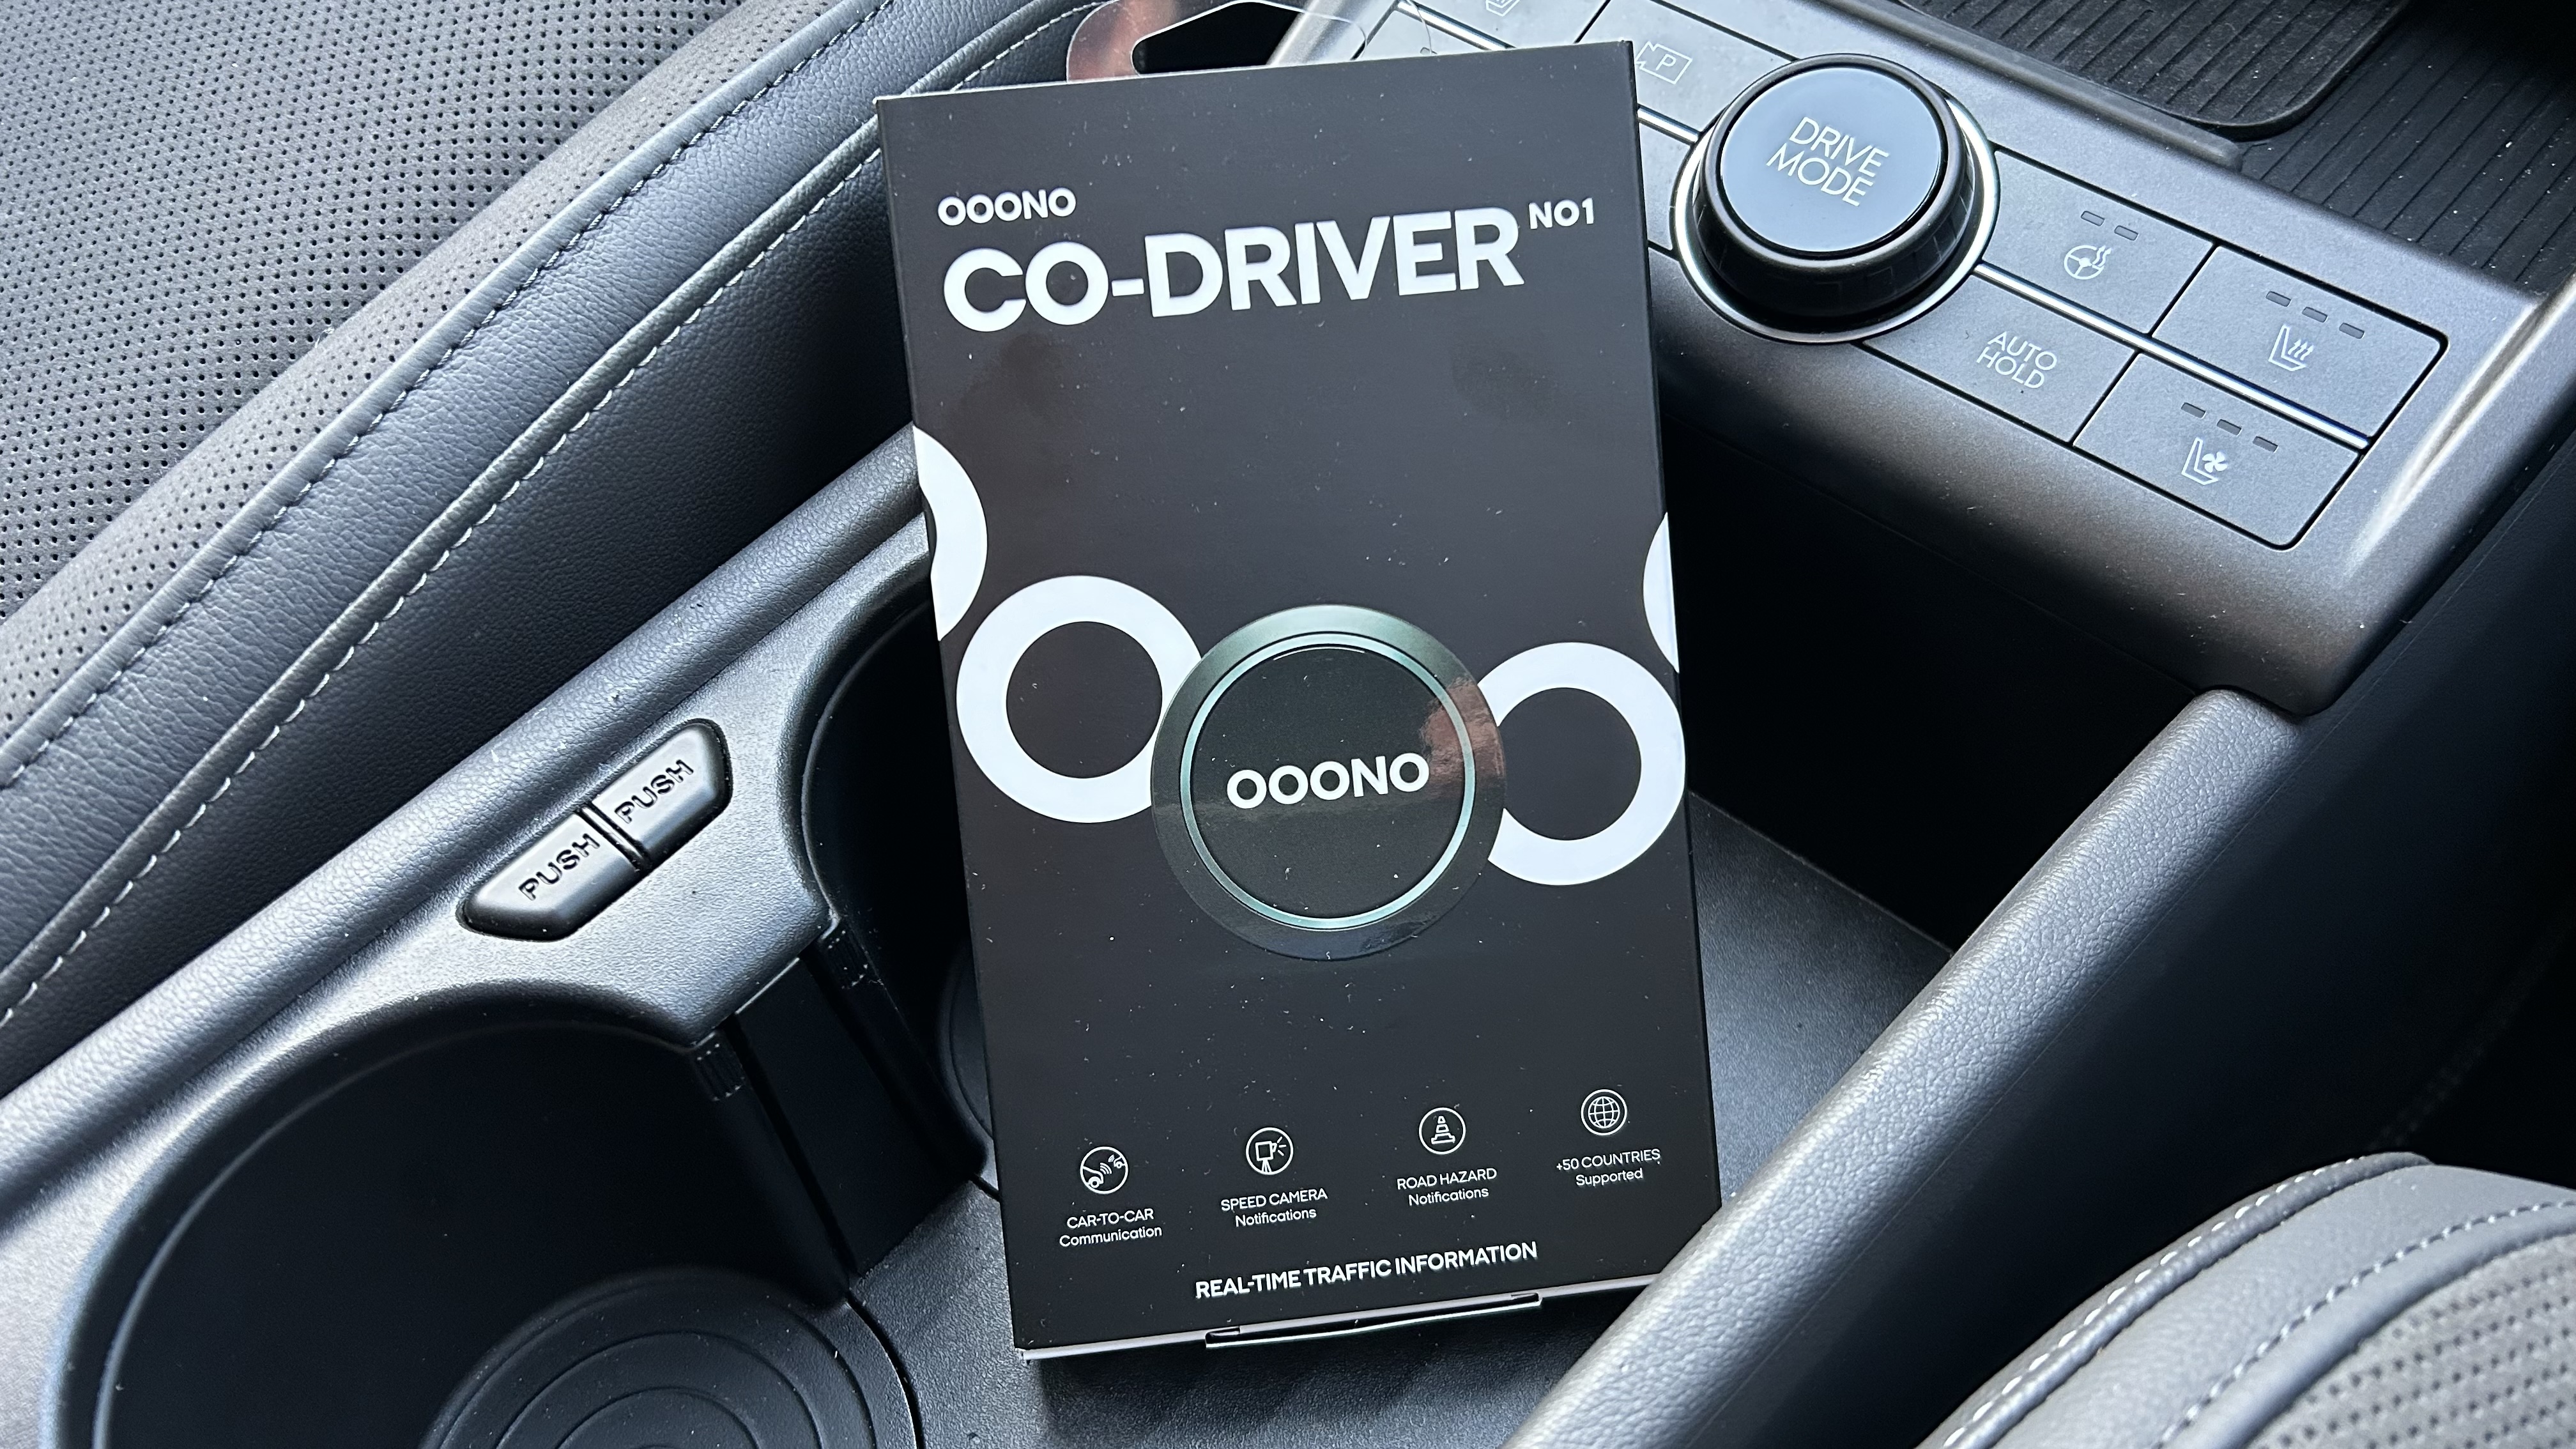 I tried the Ooono Co-Driver: It's handy if you want extra help knowing  where (most) speed cameras are